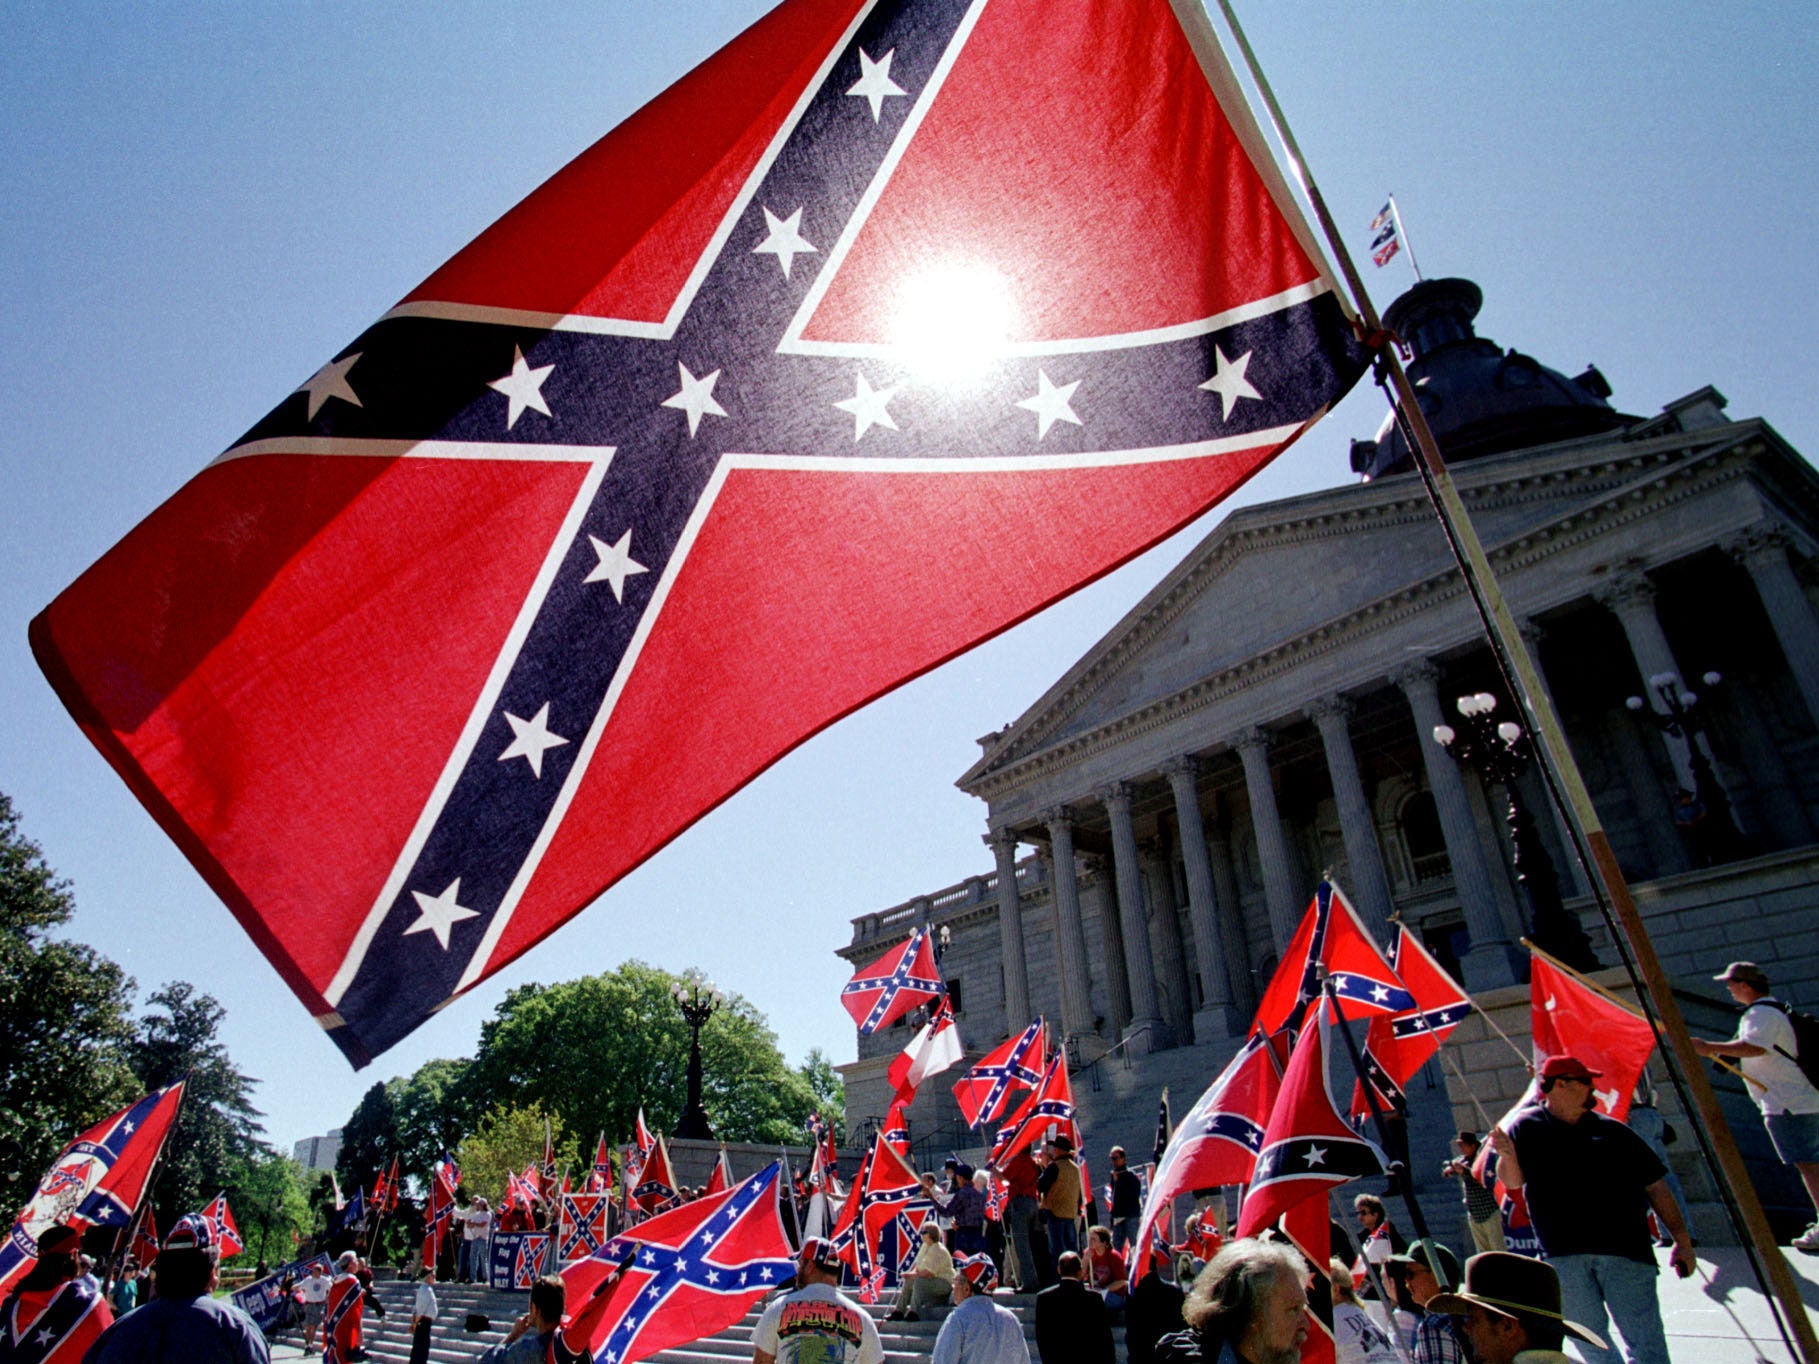 Confederate flag supporters protest its removal from South Carolina’s capitol building in 2000